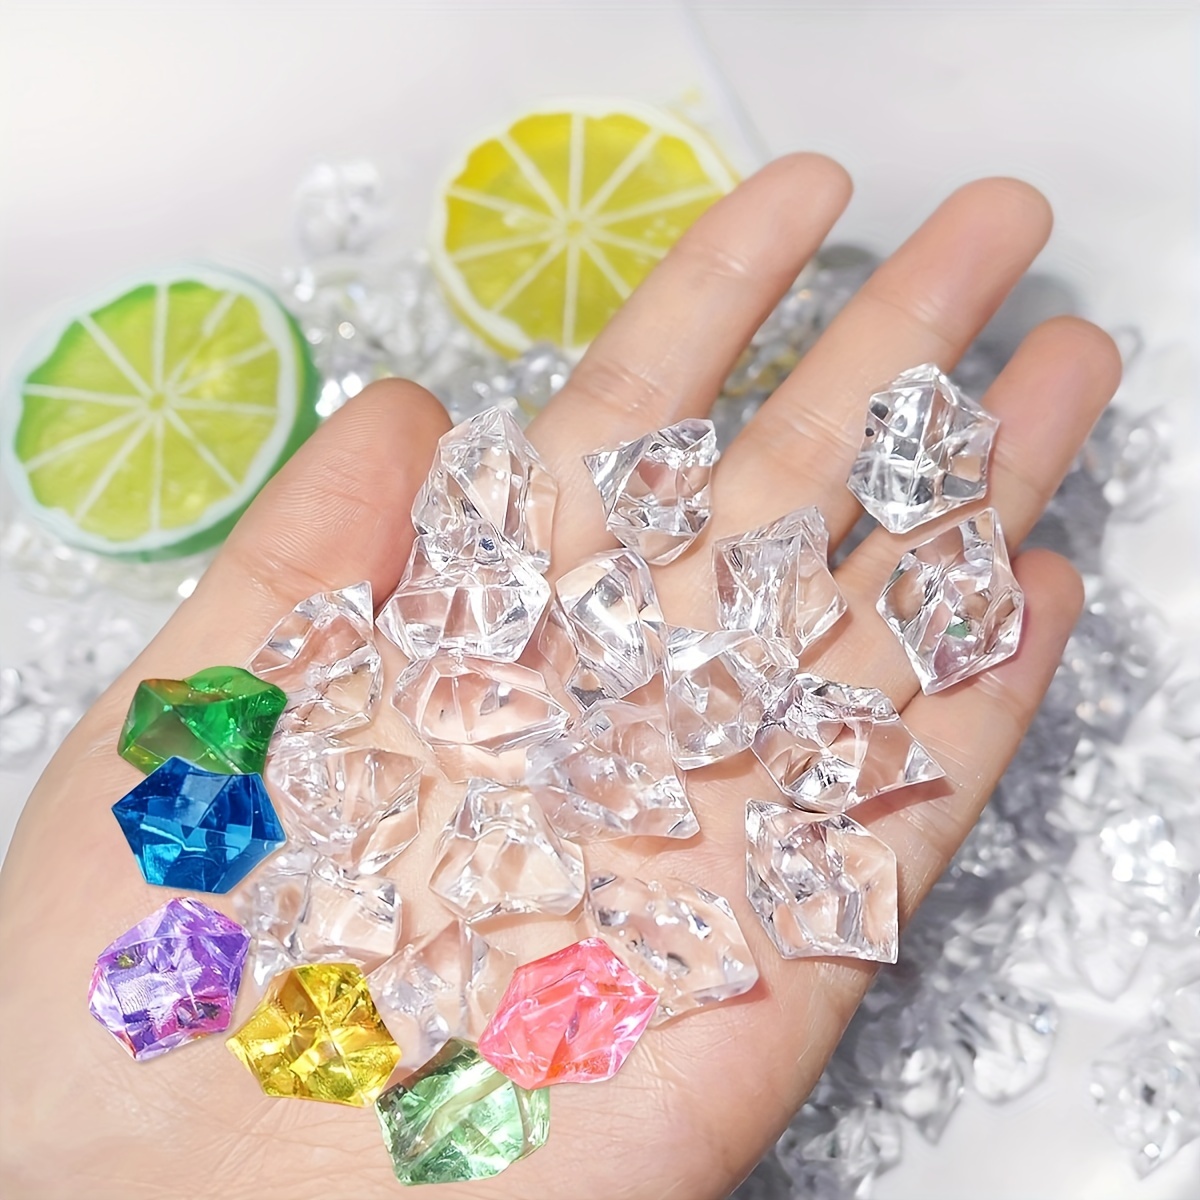 Acrylic Crushed Ice Rocks, 50 Pcs Colorful Fake Crystals Ice Cubes for Vase  Fillers, Home Decor, Table Scatter, Event, Wedding, Crafts(Multicolor)